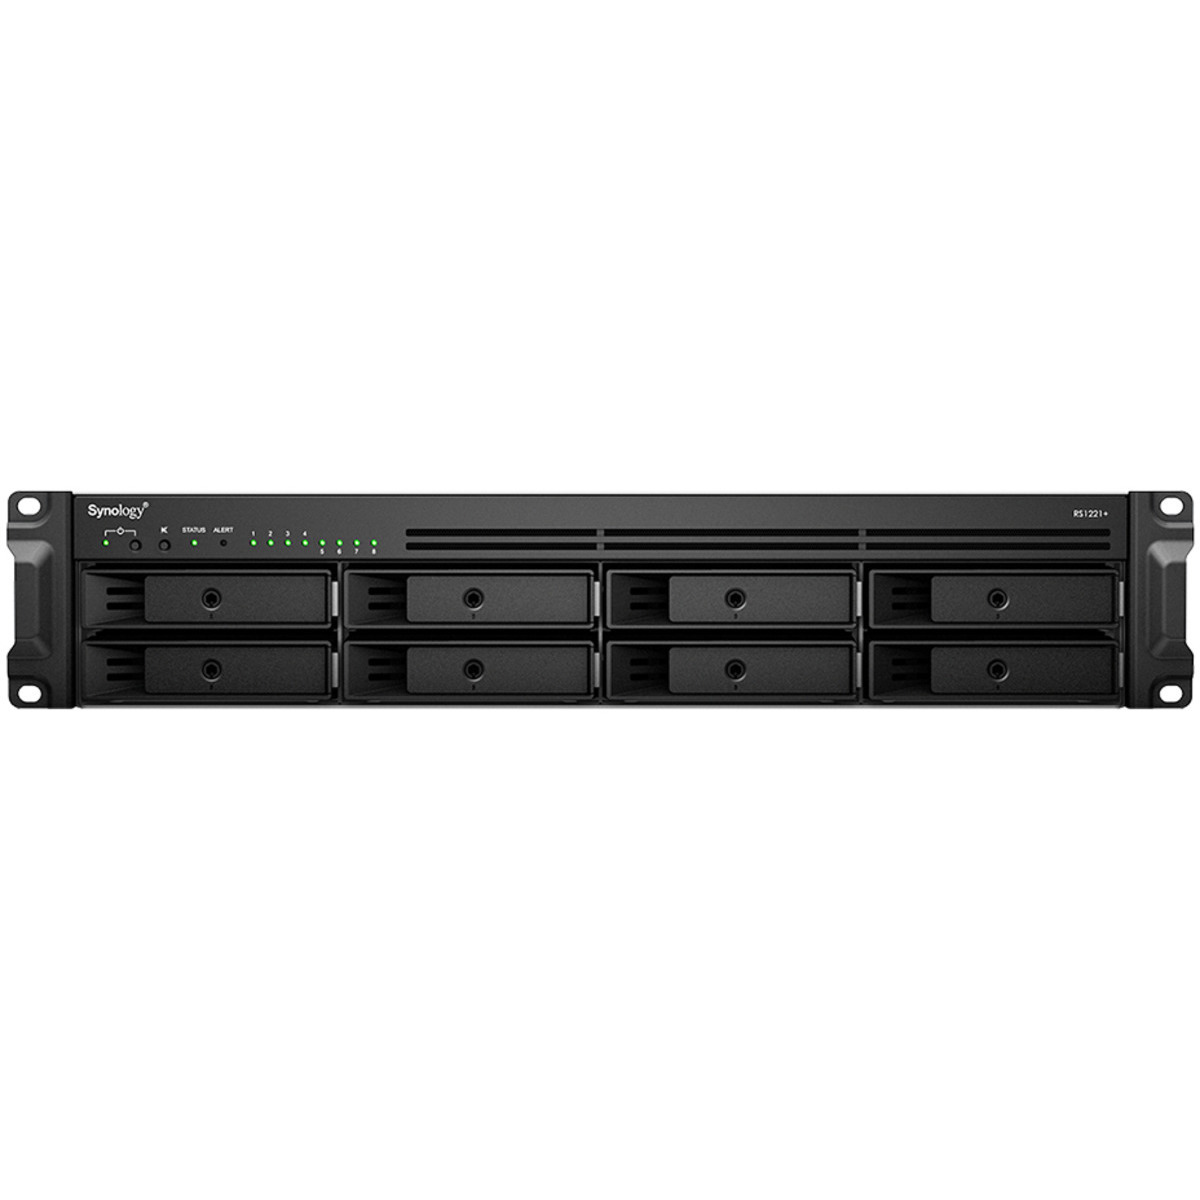 Synology RackStation RS1221+ 30tb 8-Bay RackMount Multimedia / Power User / Business NAS - Network Attached Storage Device 5x6tb Synology Plus Series HAT3300-6T 3.5 5400rmp SATA 6Gb/s HDD NAS Class Drives Installed - Burn-In Tested RackStation RS1221+